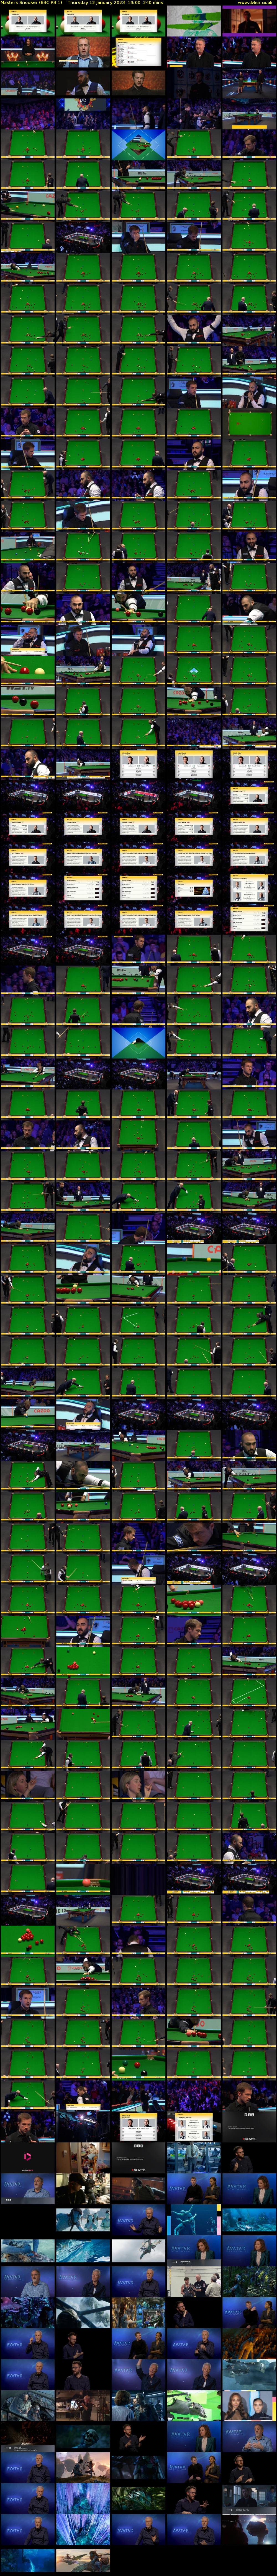 Masters Snooker (BBC RB 1) Thursday 12 January 2023 19:00 - 23:00